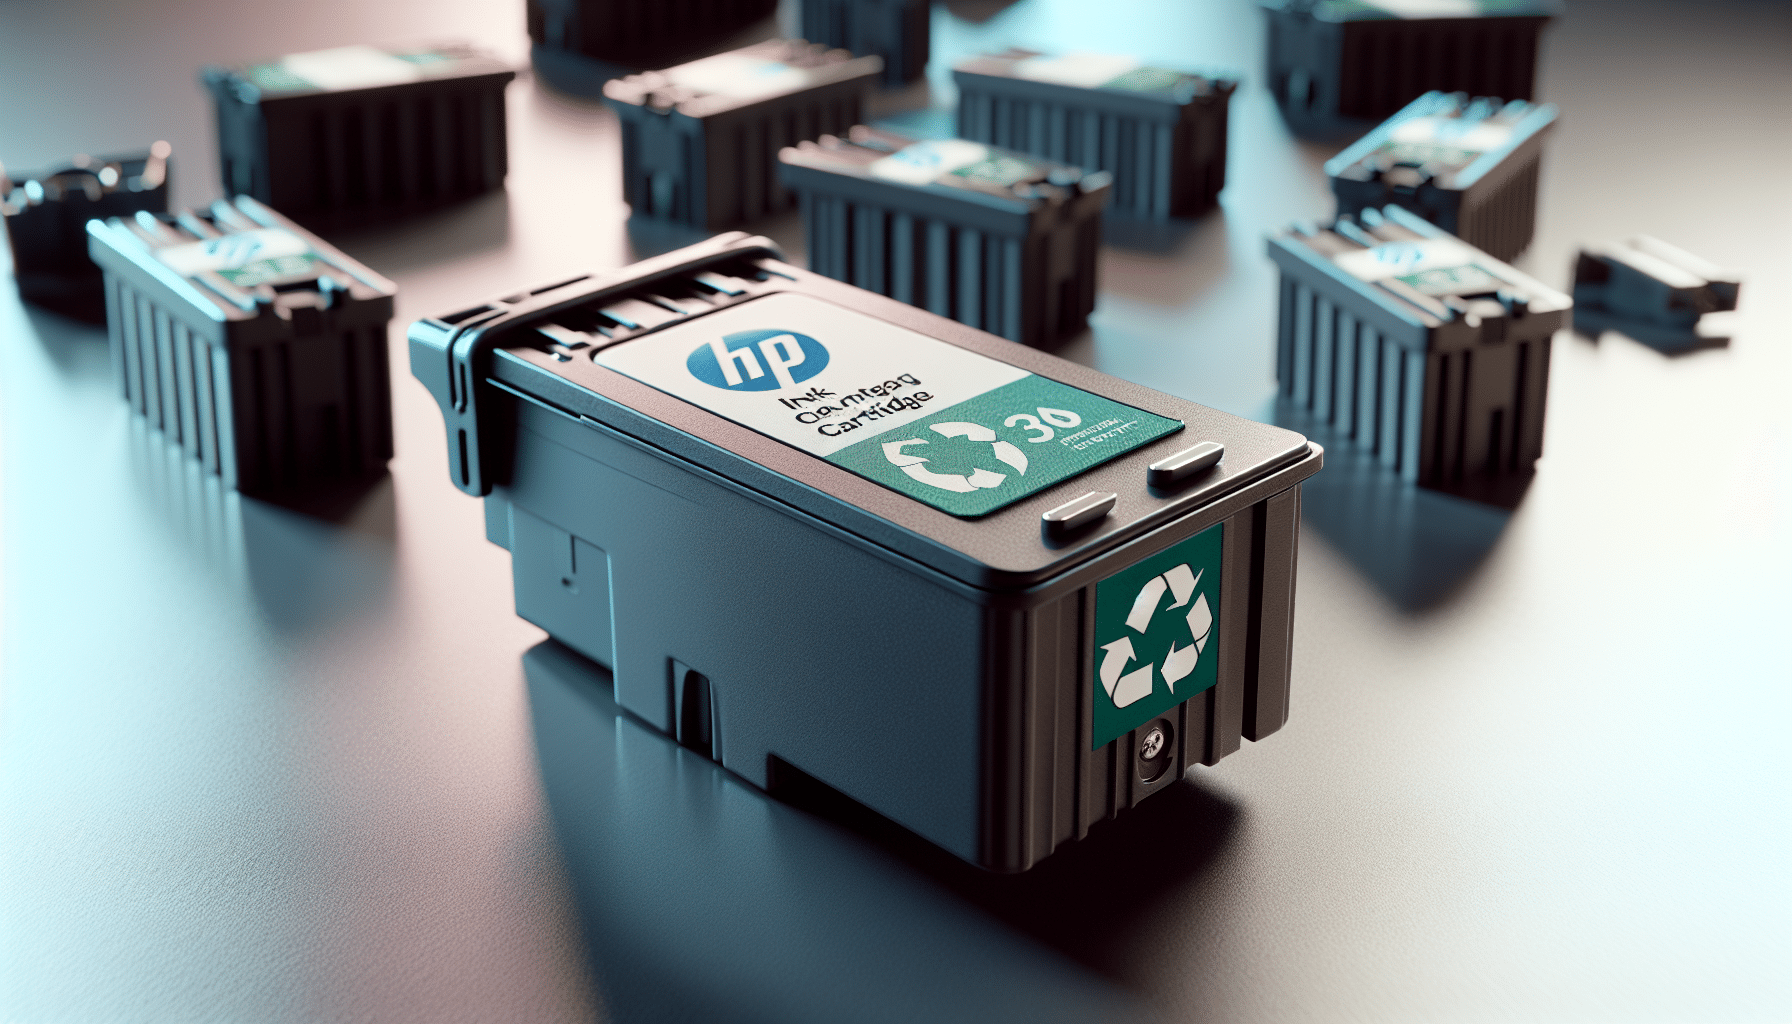 HP ink cartridge highlighting importance of recycling